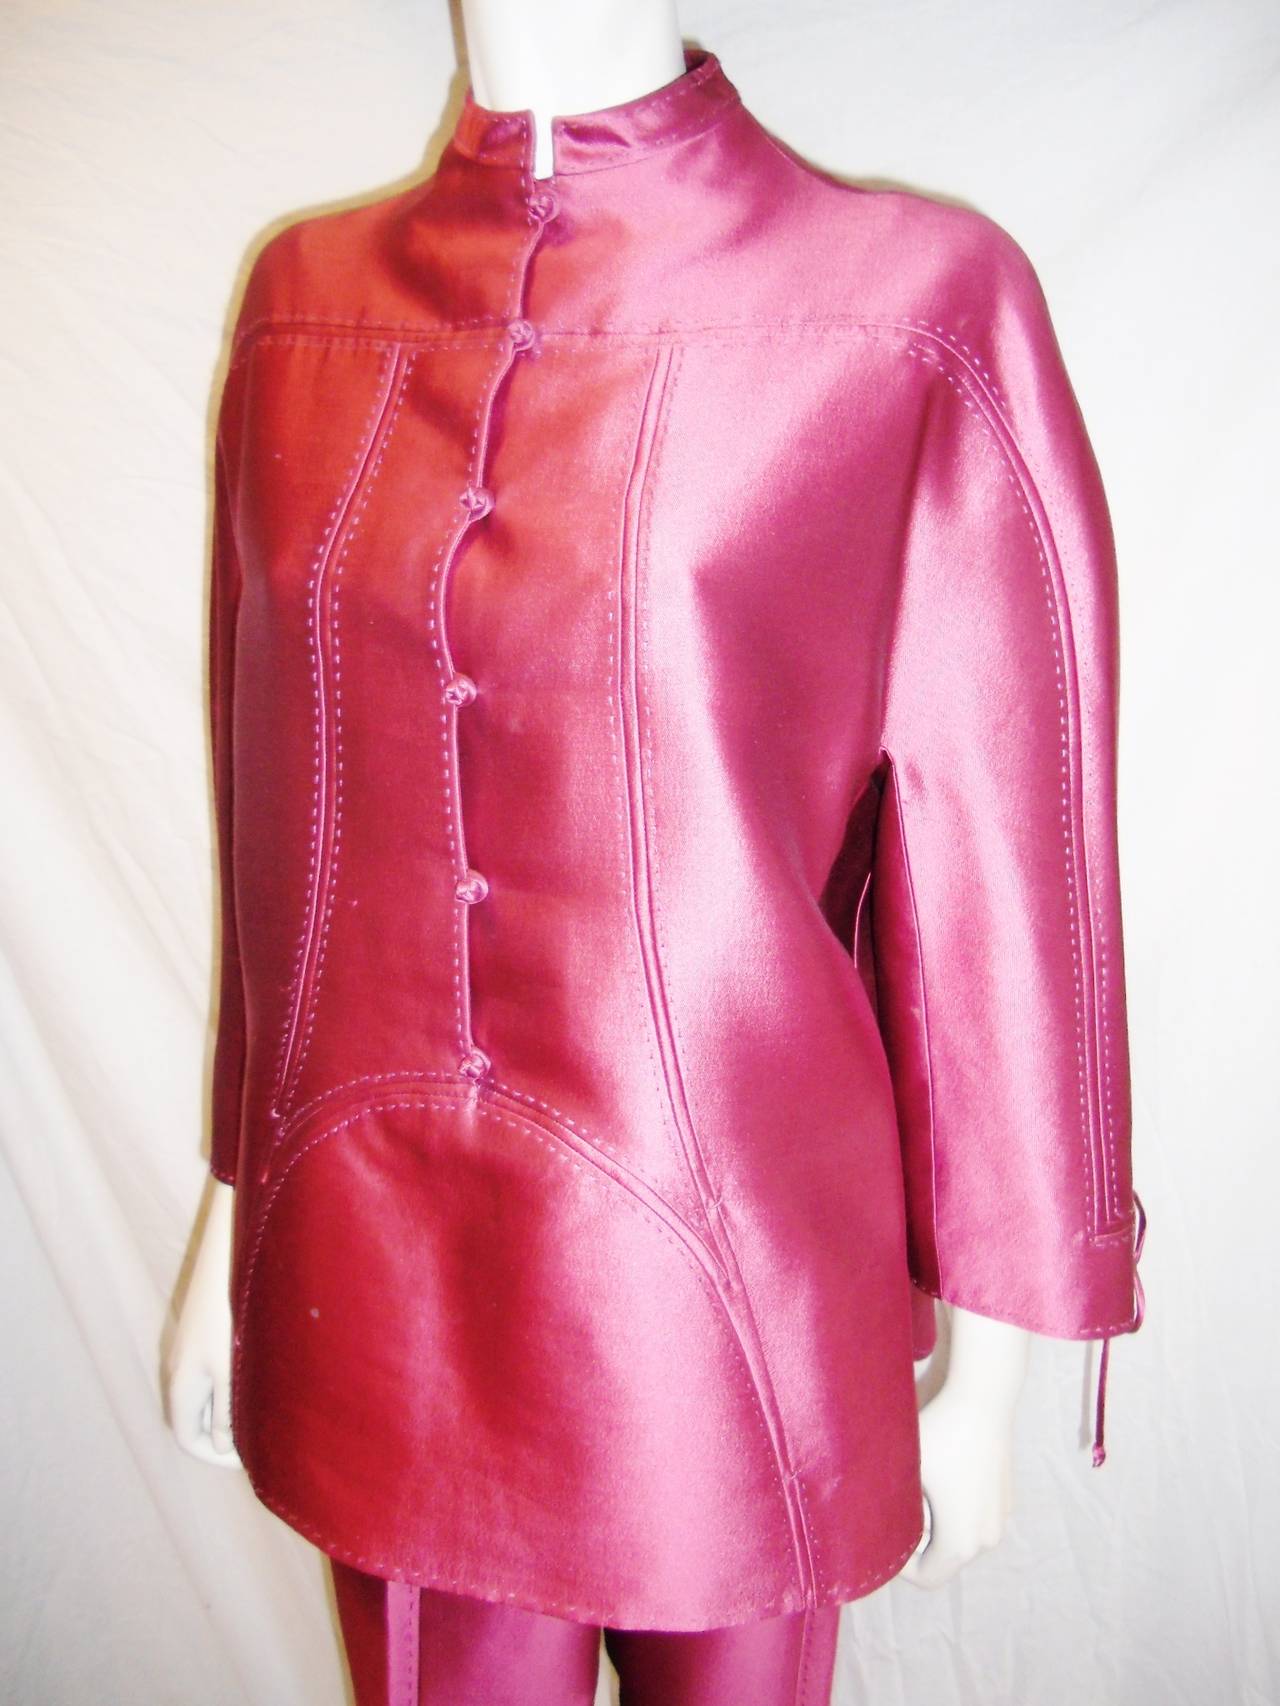 Silk Pink silver evening  Pant suit by Chado Ralph Rucci. New. Straight pants with front slit. Hand top stitching. 
Size 10
pants waist 32